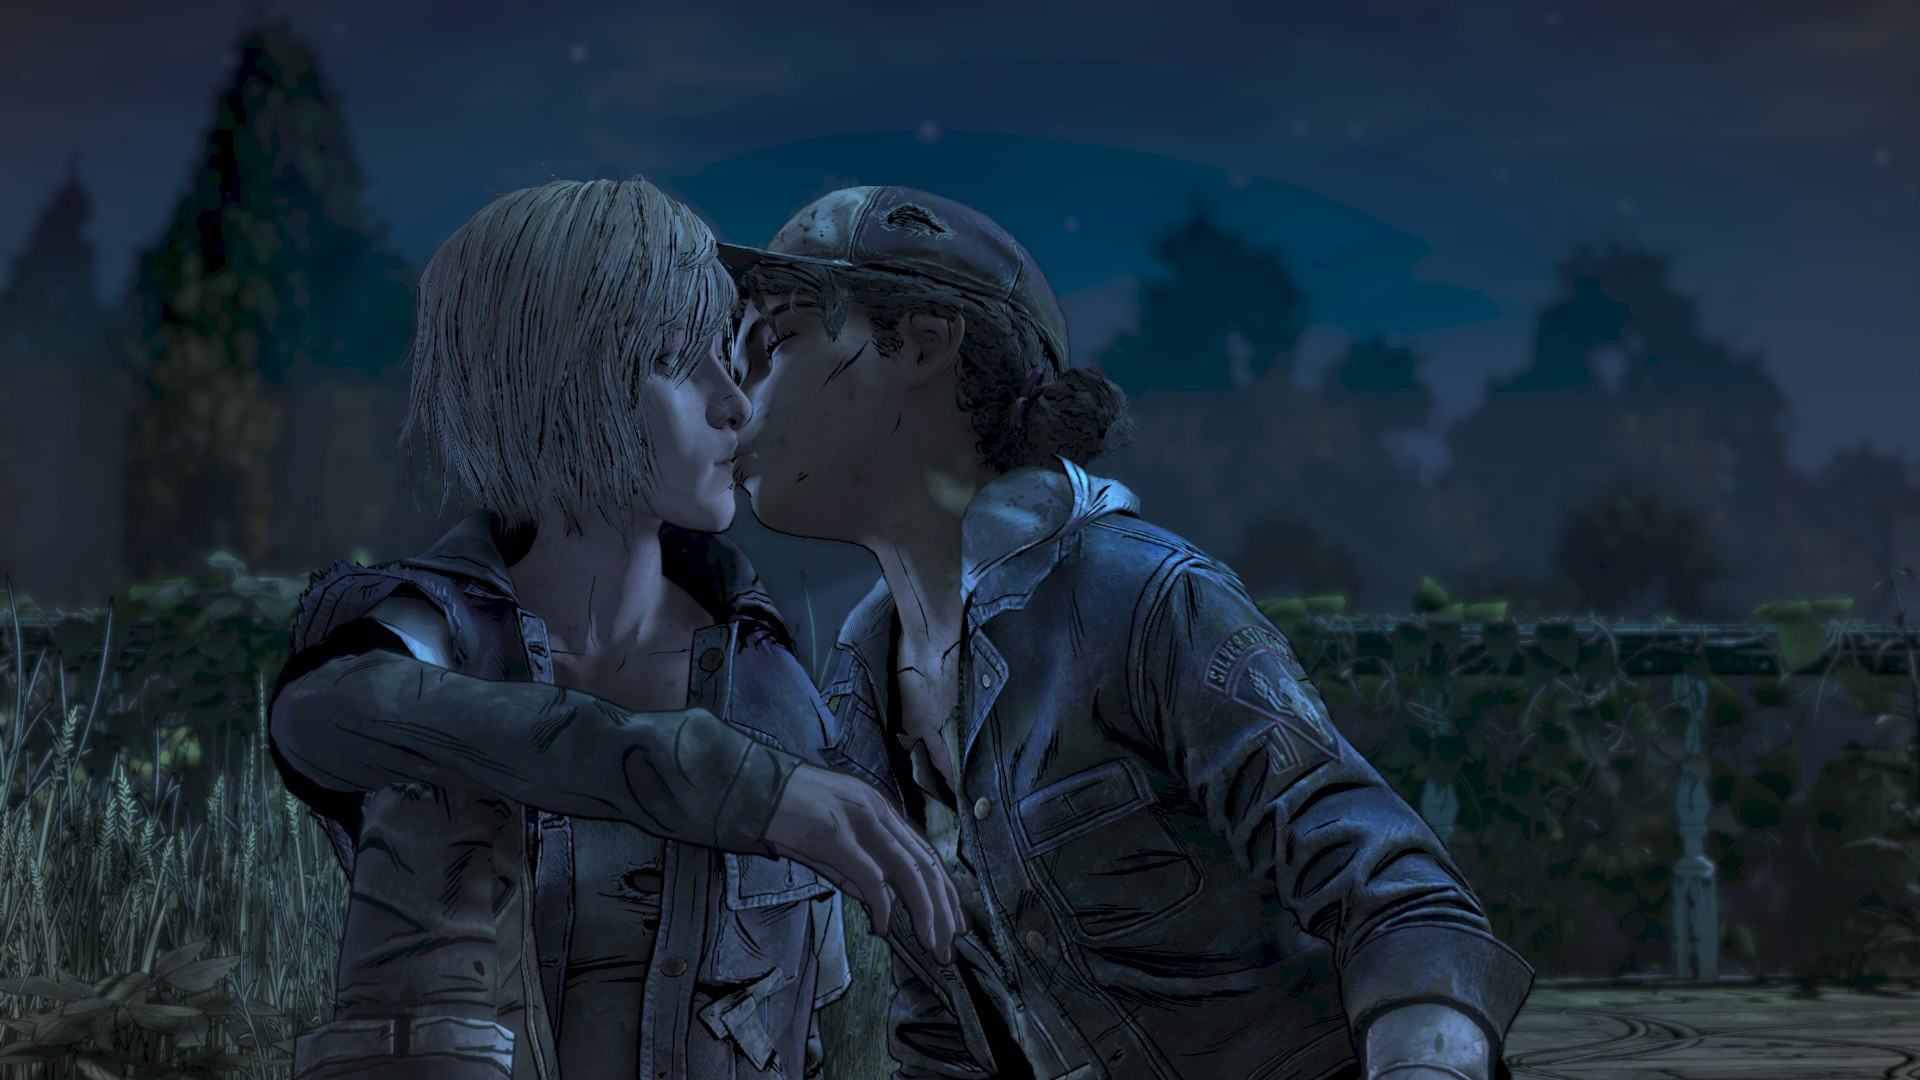 It's night-time and two young girls are outside. Clementine is on the right and she is leaning over and kissing the other girl with eyes closed. She has a tattered baseball cap and short black curly hair in a small bun. She has a cut on her left cheek and is wearing a jean jacket. Violet has blonde straight hair to her chin and looks surprised by the kiss, eyes still open. She's wearing a tattered hooded jacked and pants.